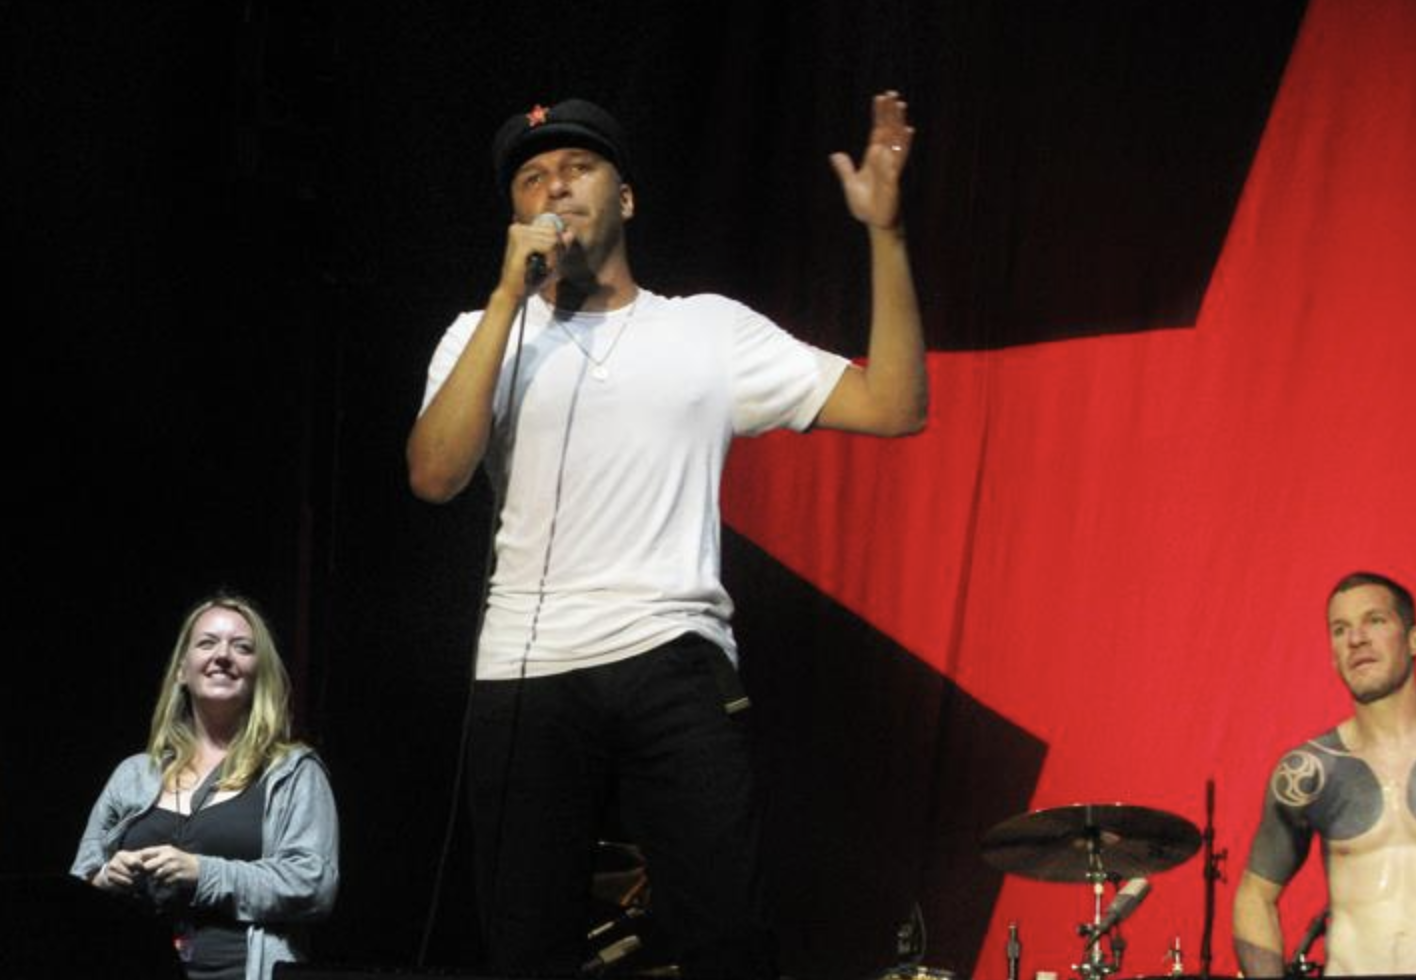 Photographer Tracy Morter on stage with tom Morello and Rage Against the Machine at Finsbury Park in 2010.